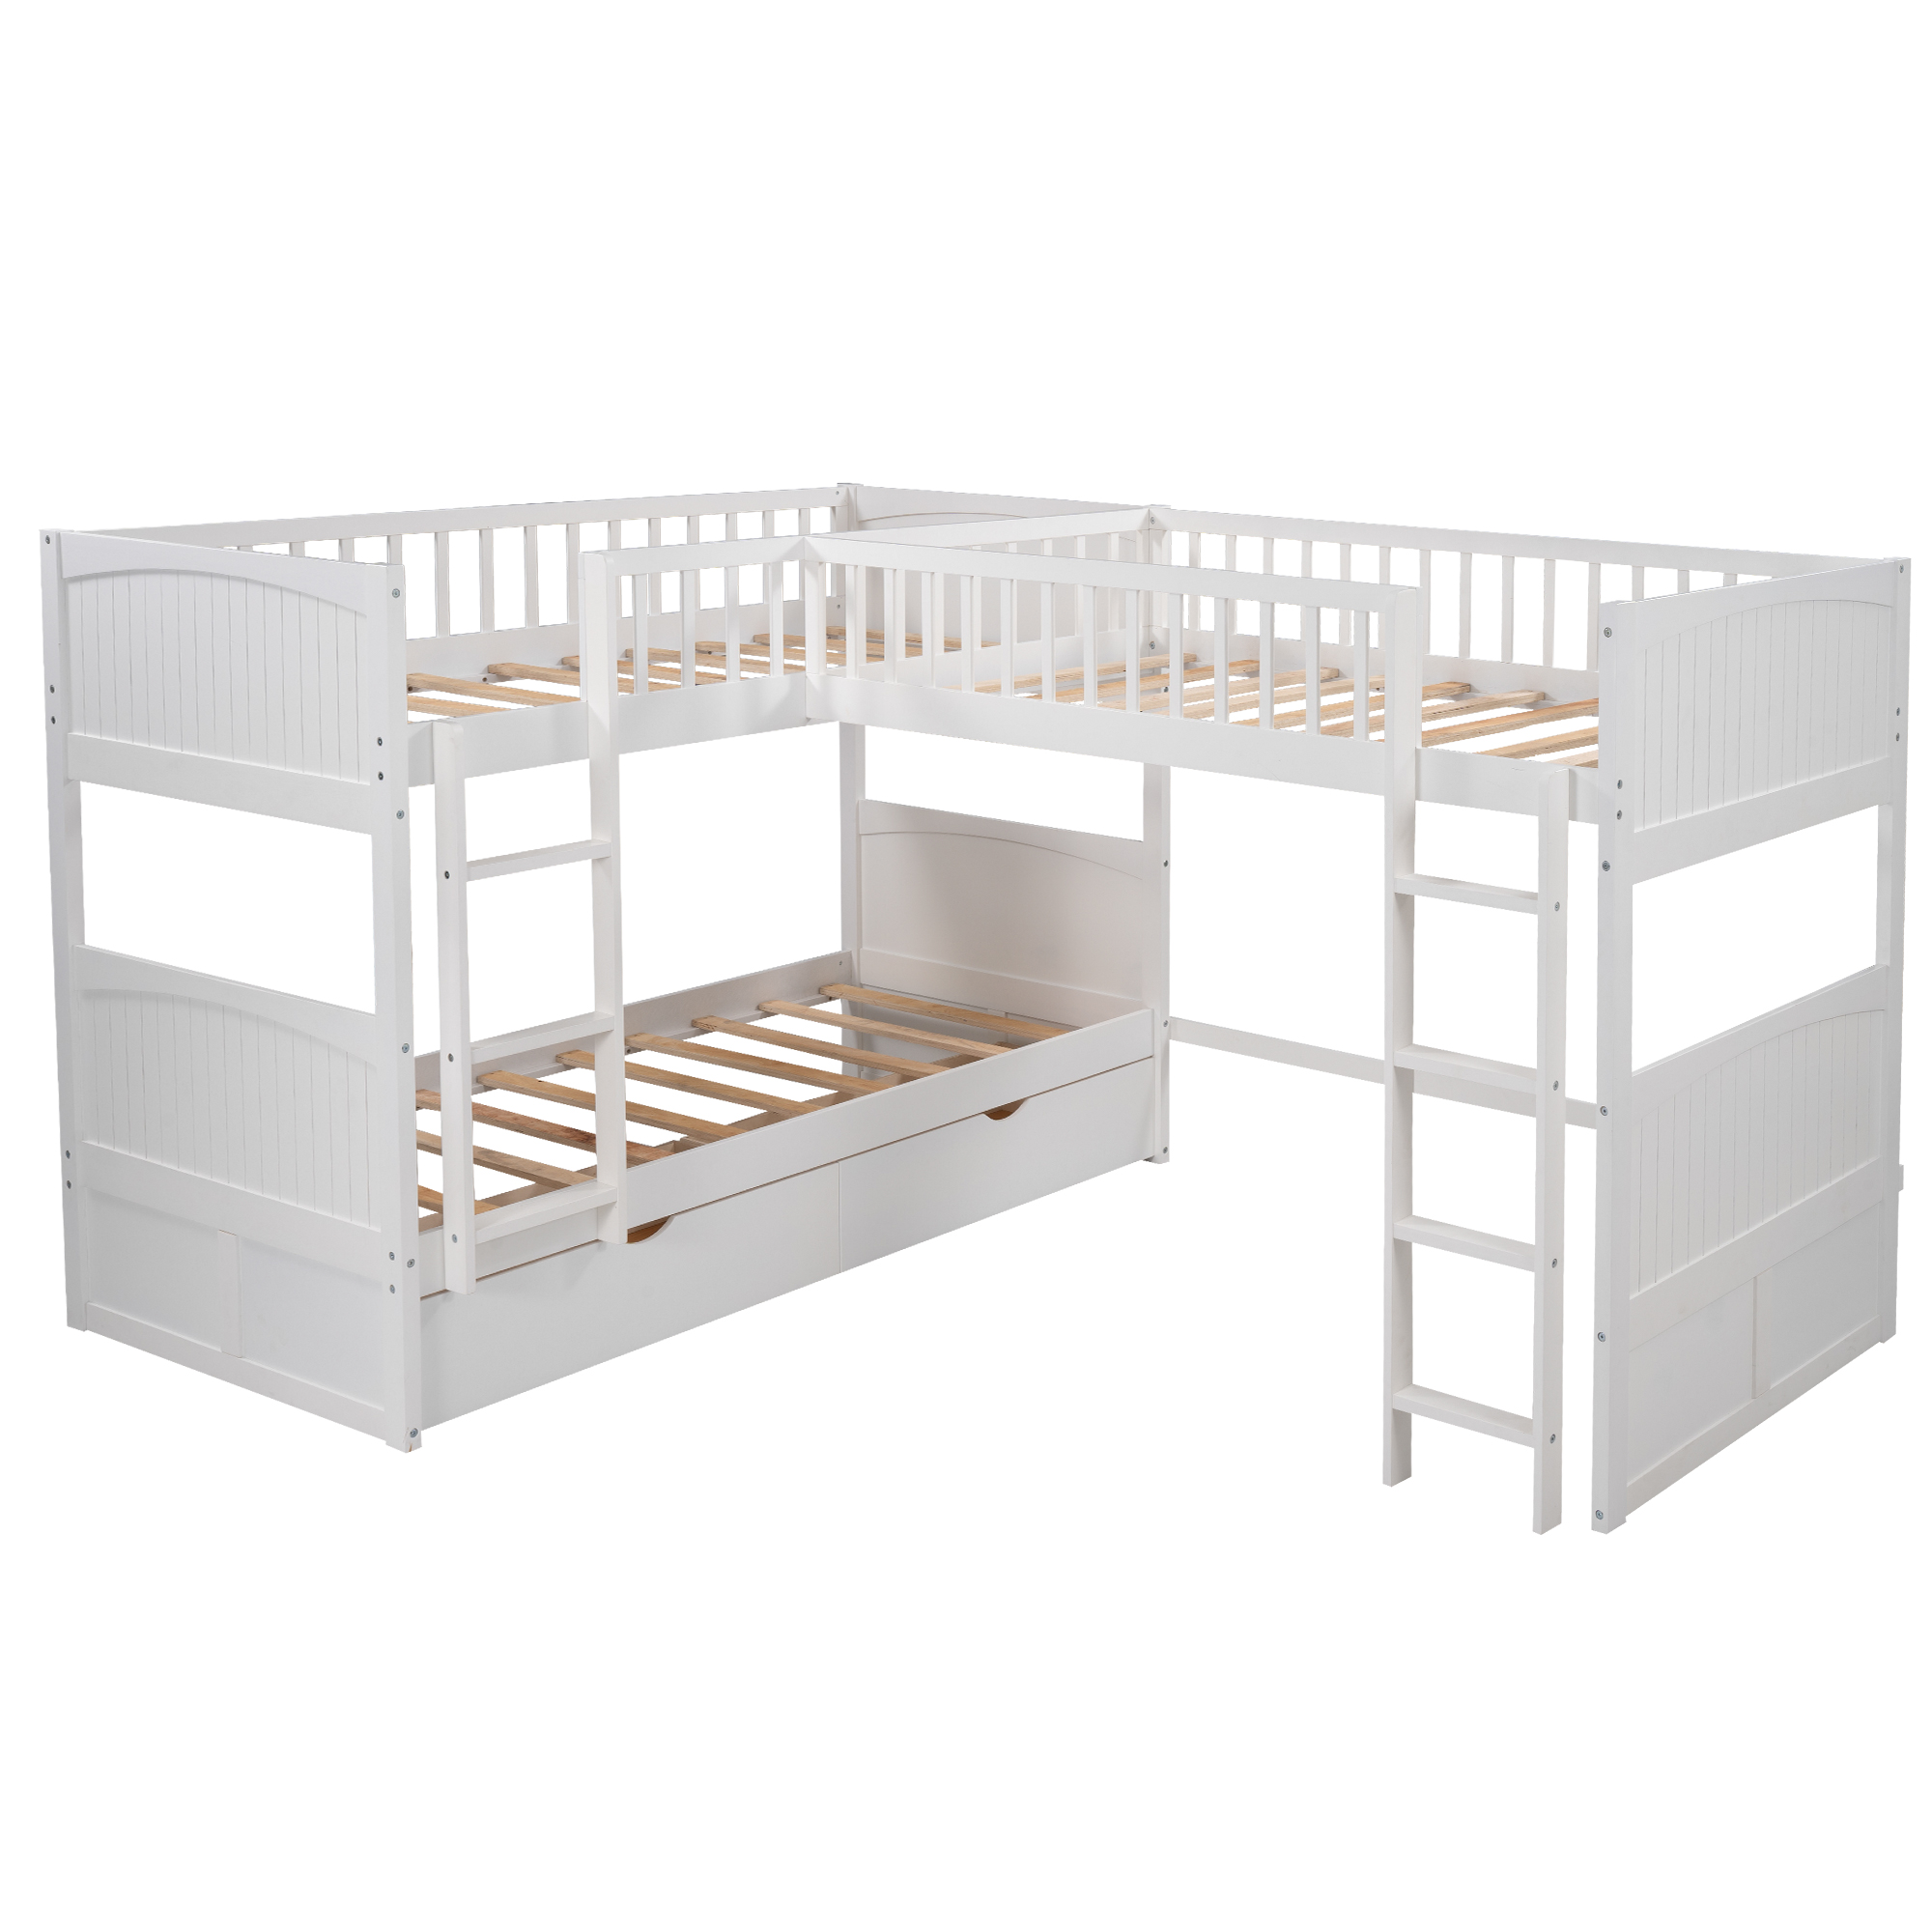 Euroco Wood Bunk Bed Storage, Twin-over-Twin-over-Twin for Children's Bedroom, White - image 6 of 12